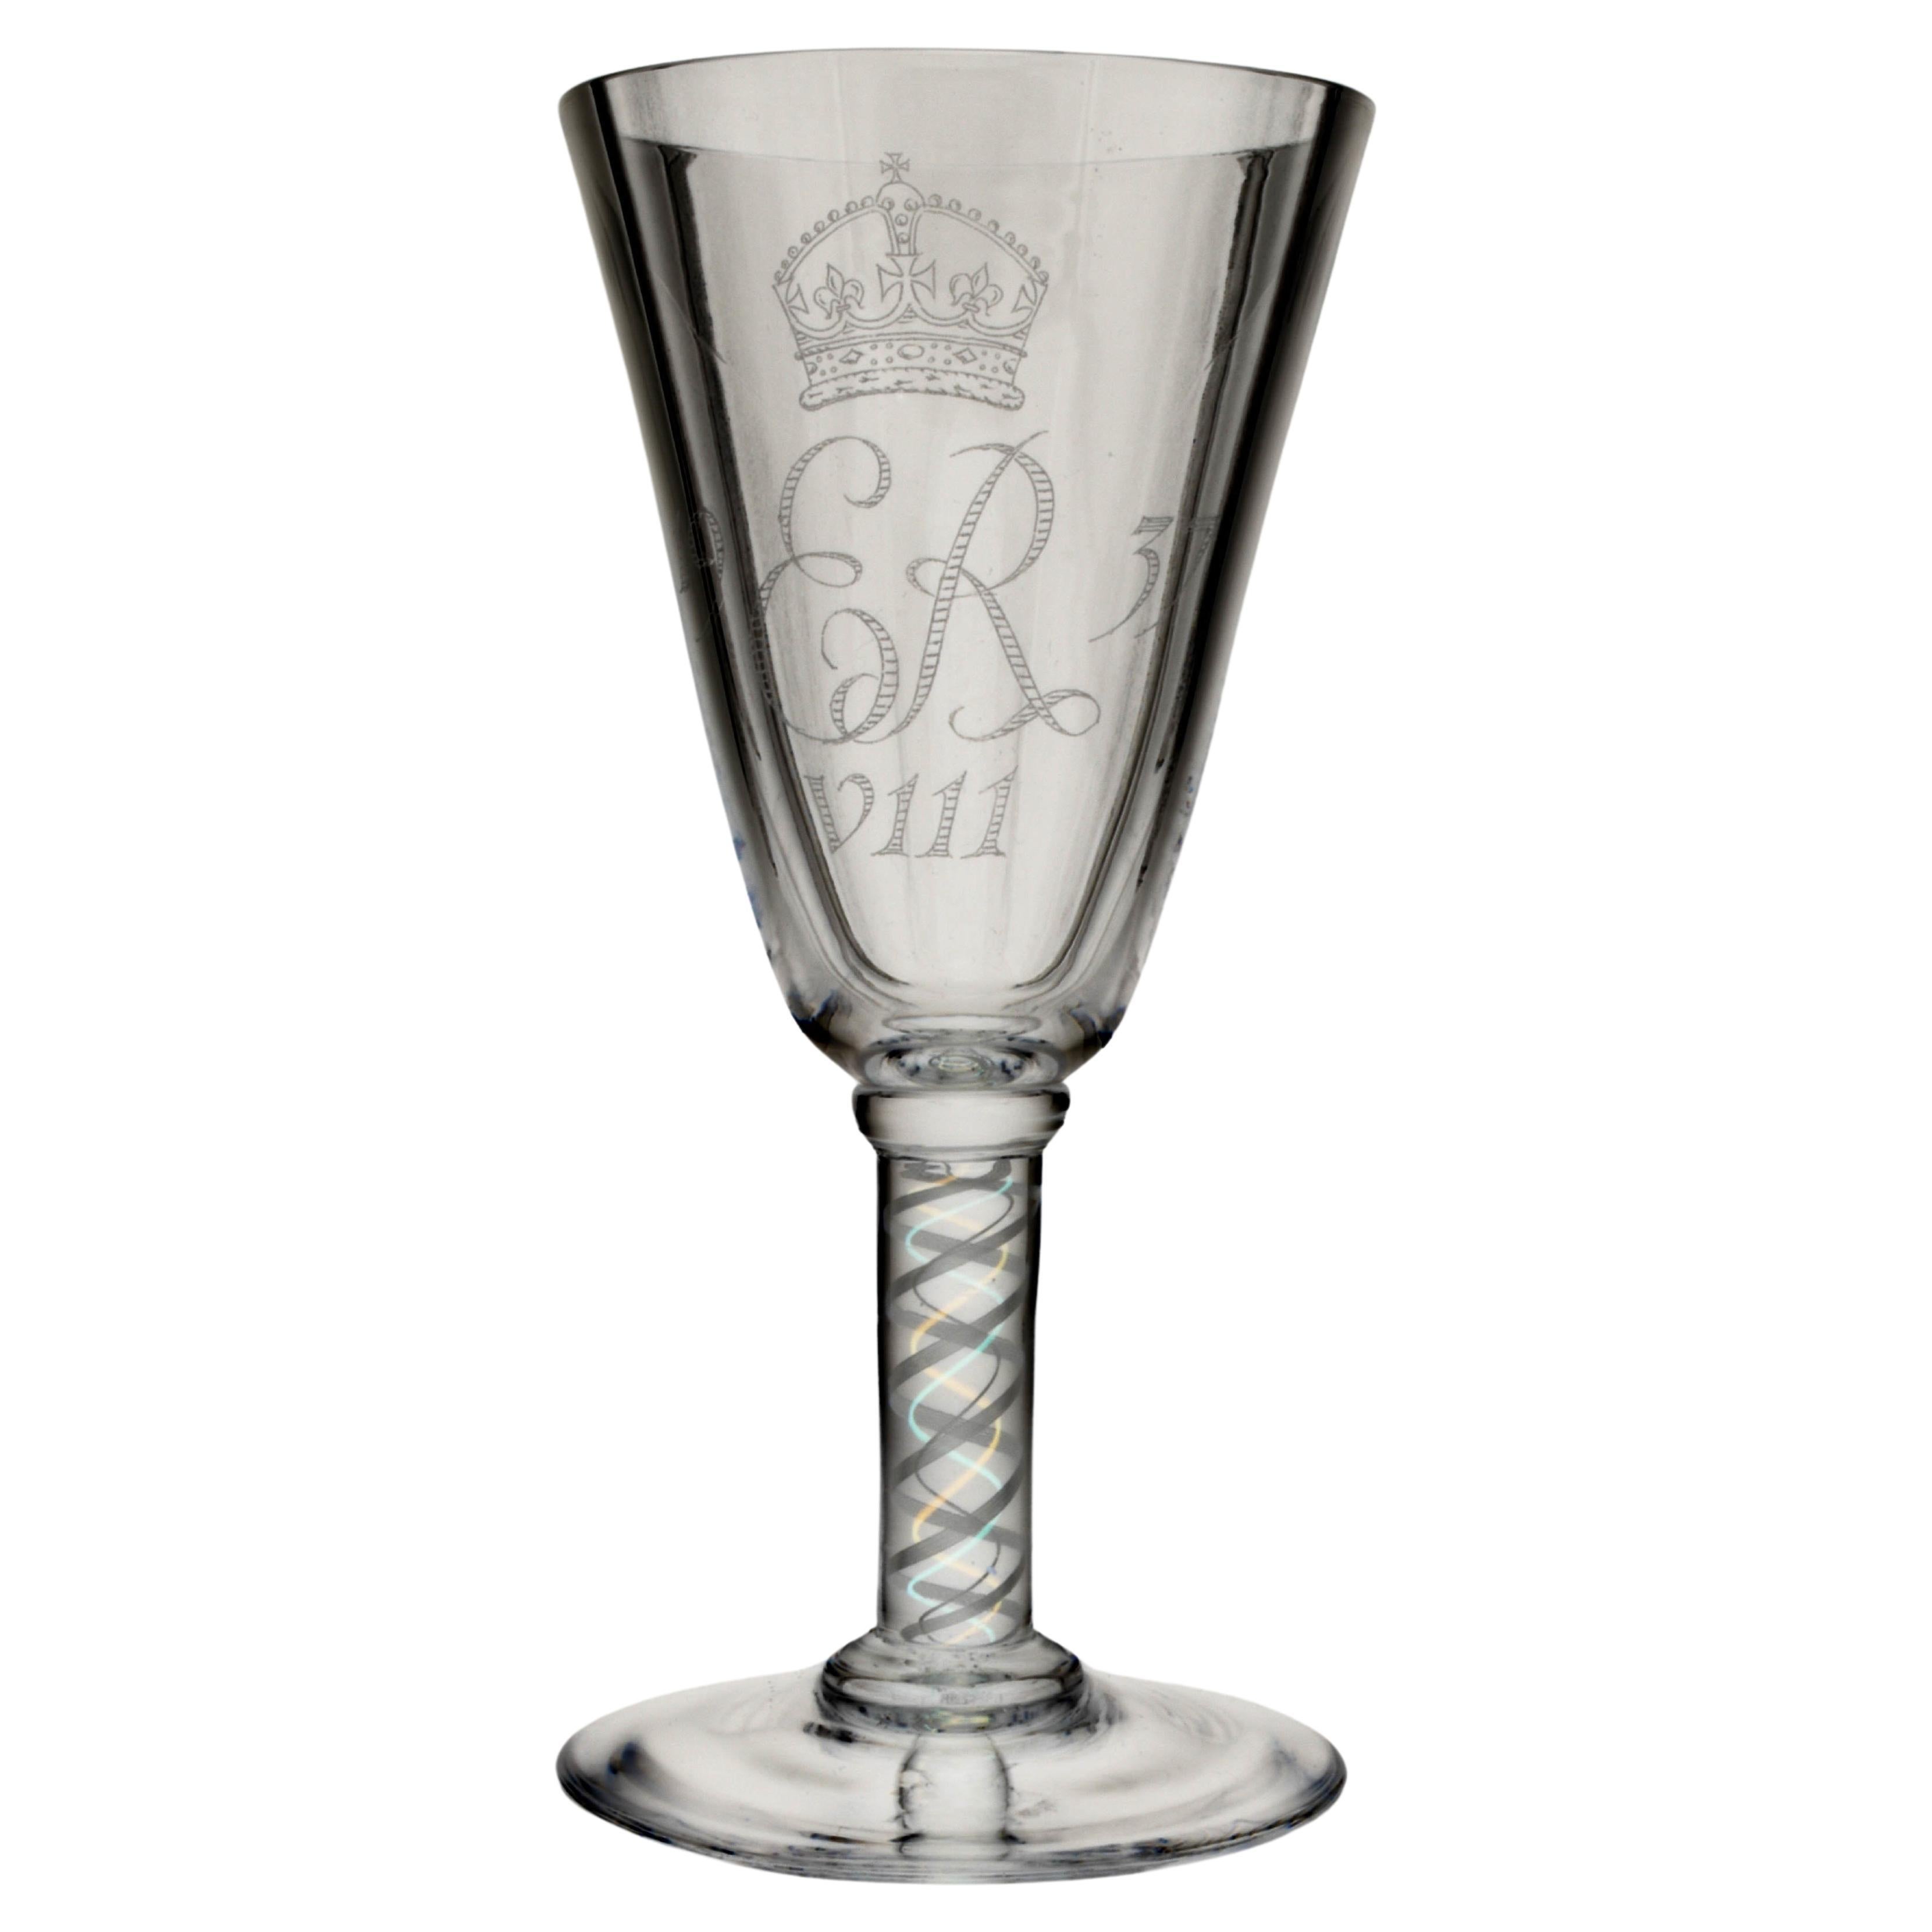 Oversized wine glass with airtwist stem, for the Coronation of Edward VIII 1937 For Sale